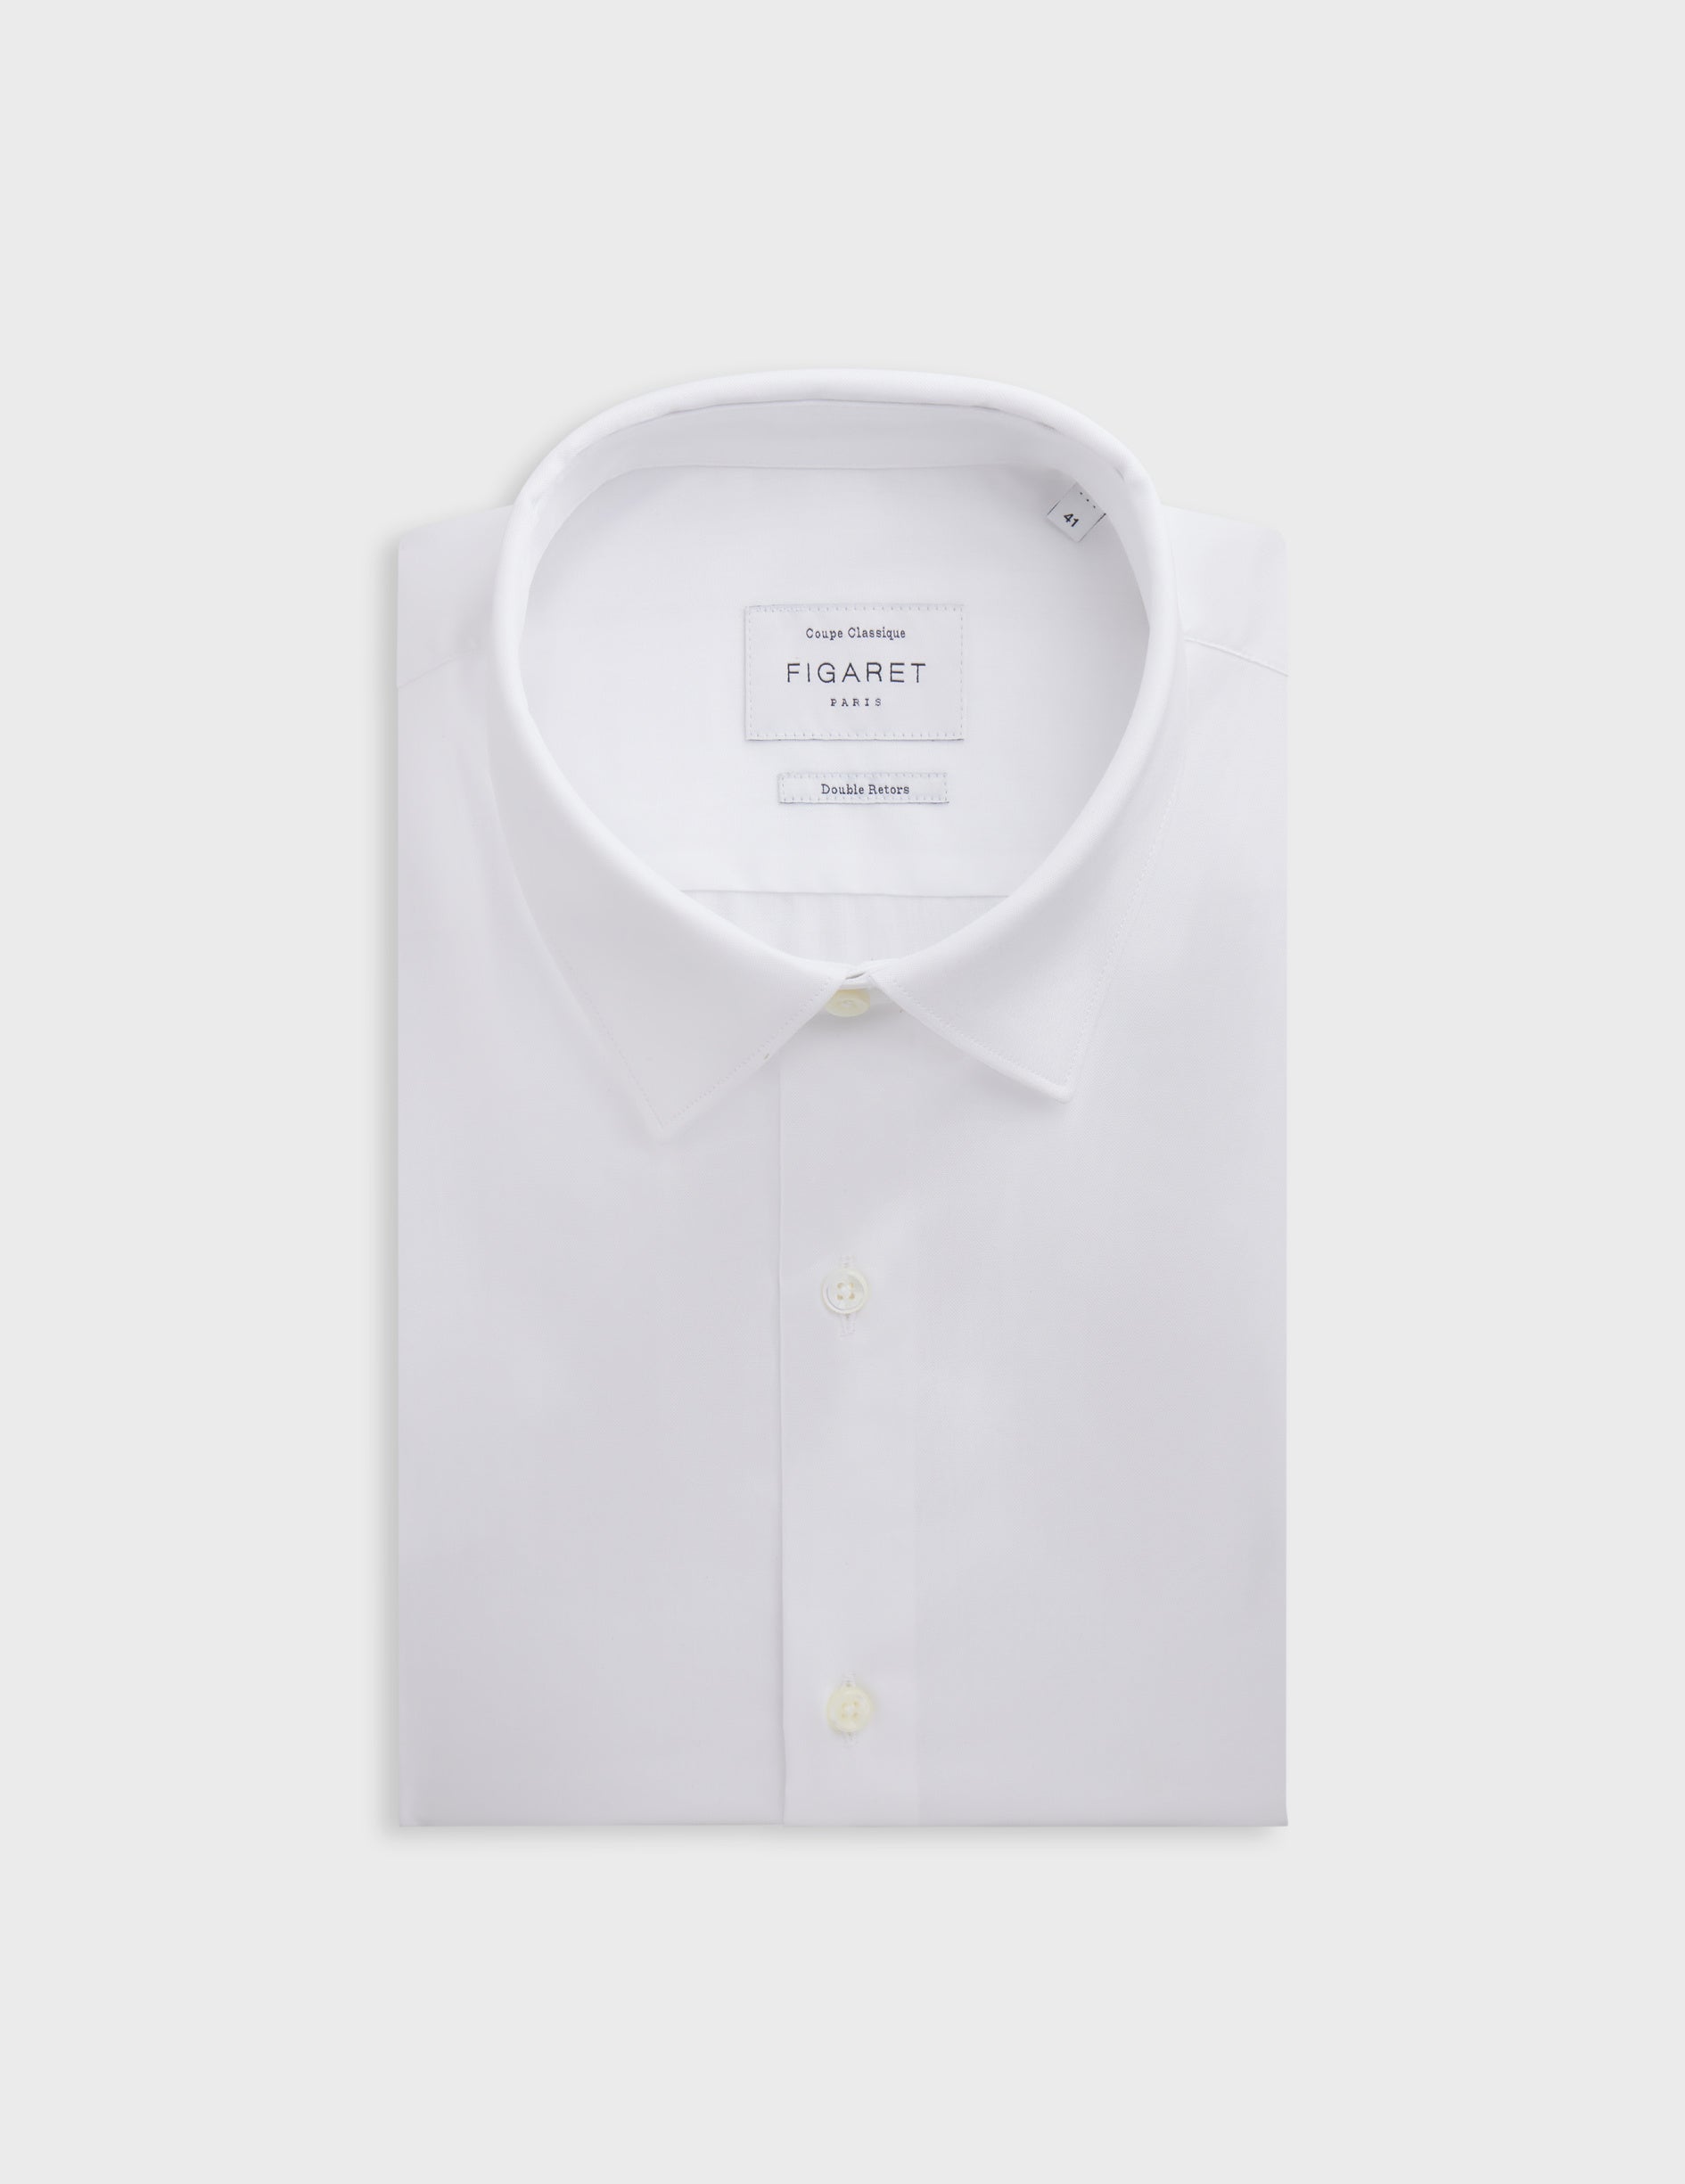 Classic white shirt - pin point - Figaret Collar - French Cuffs